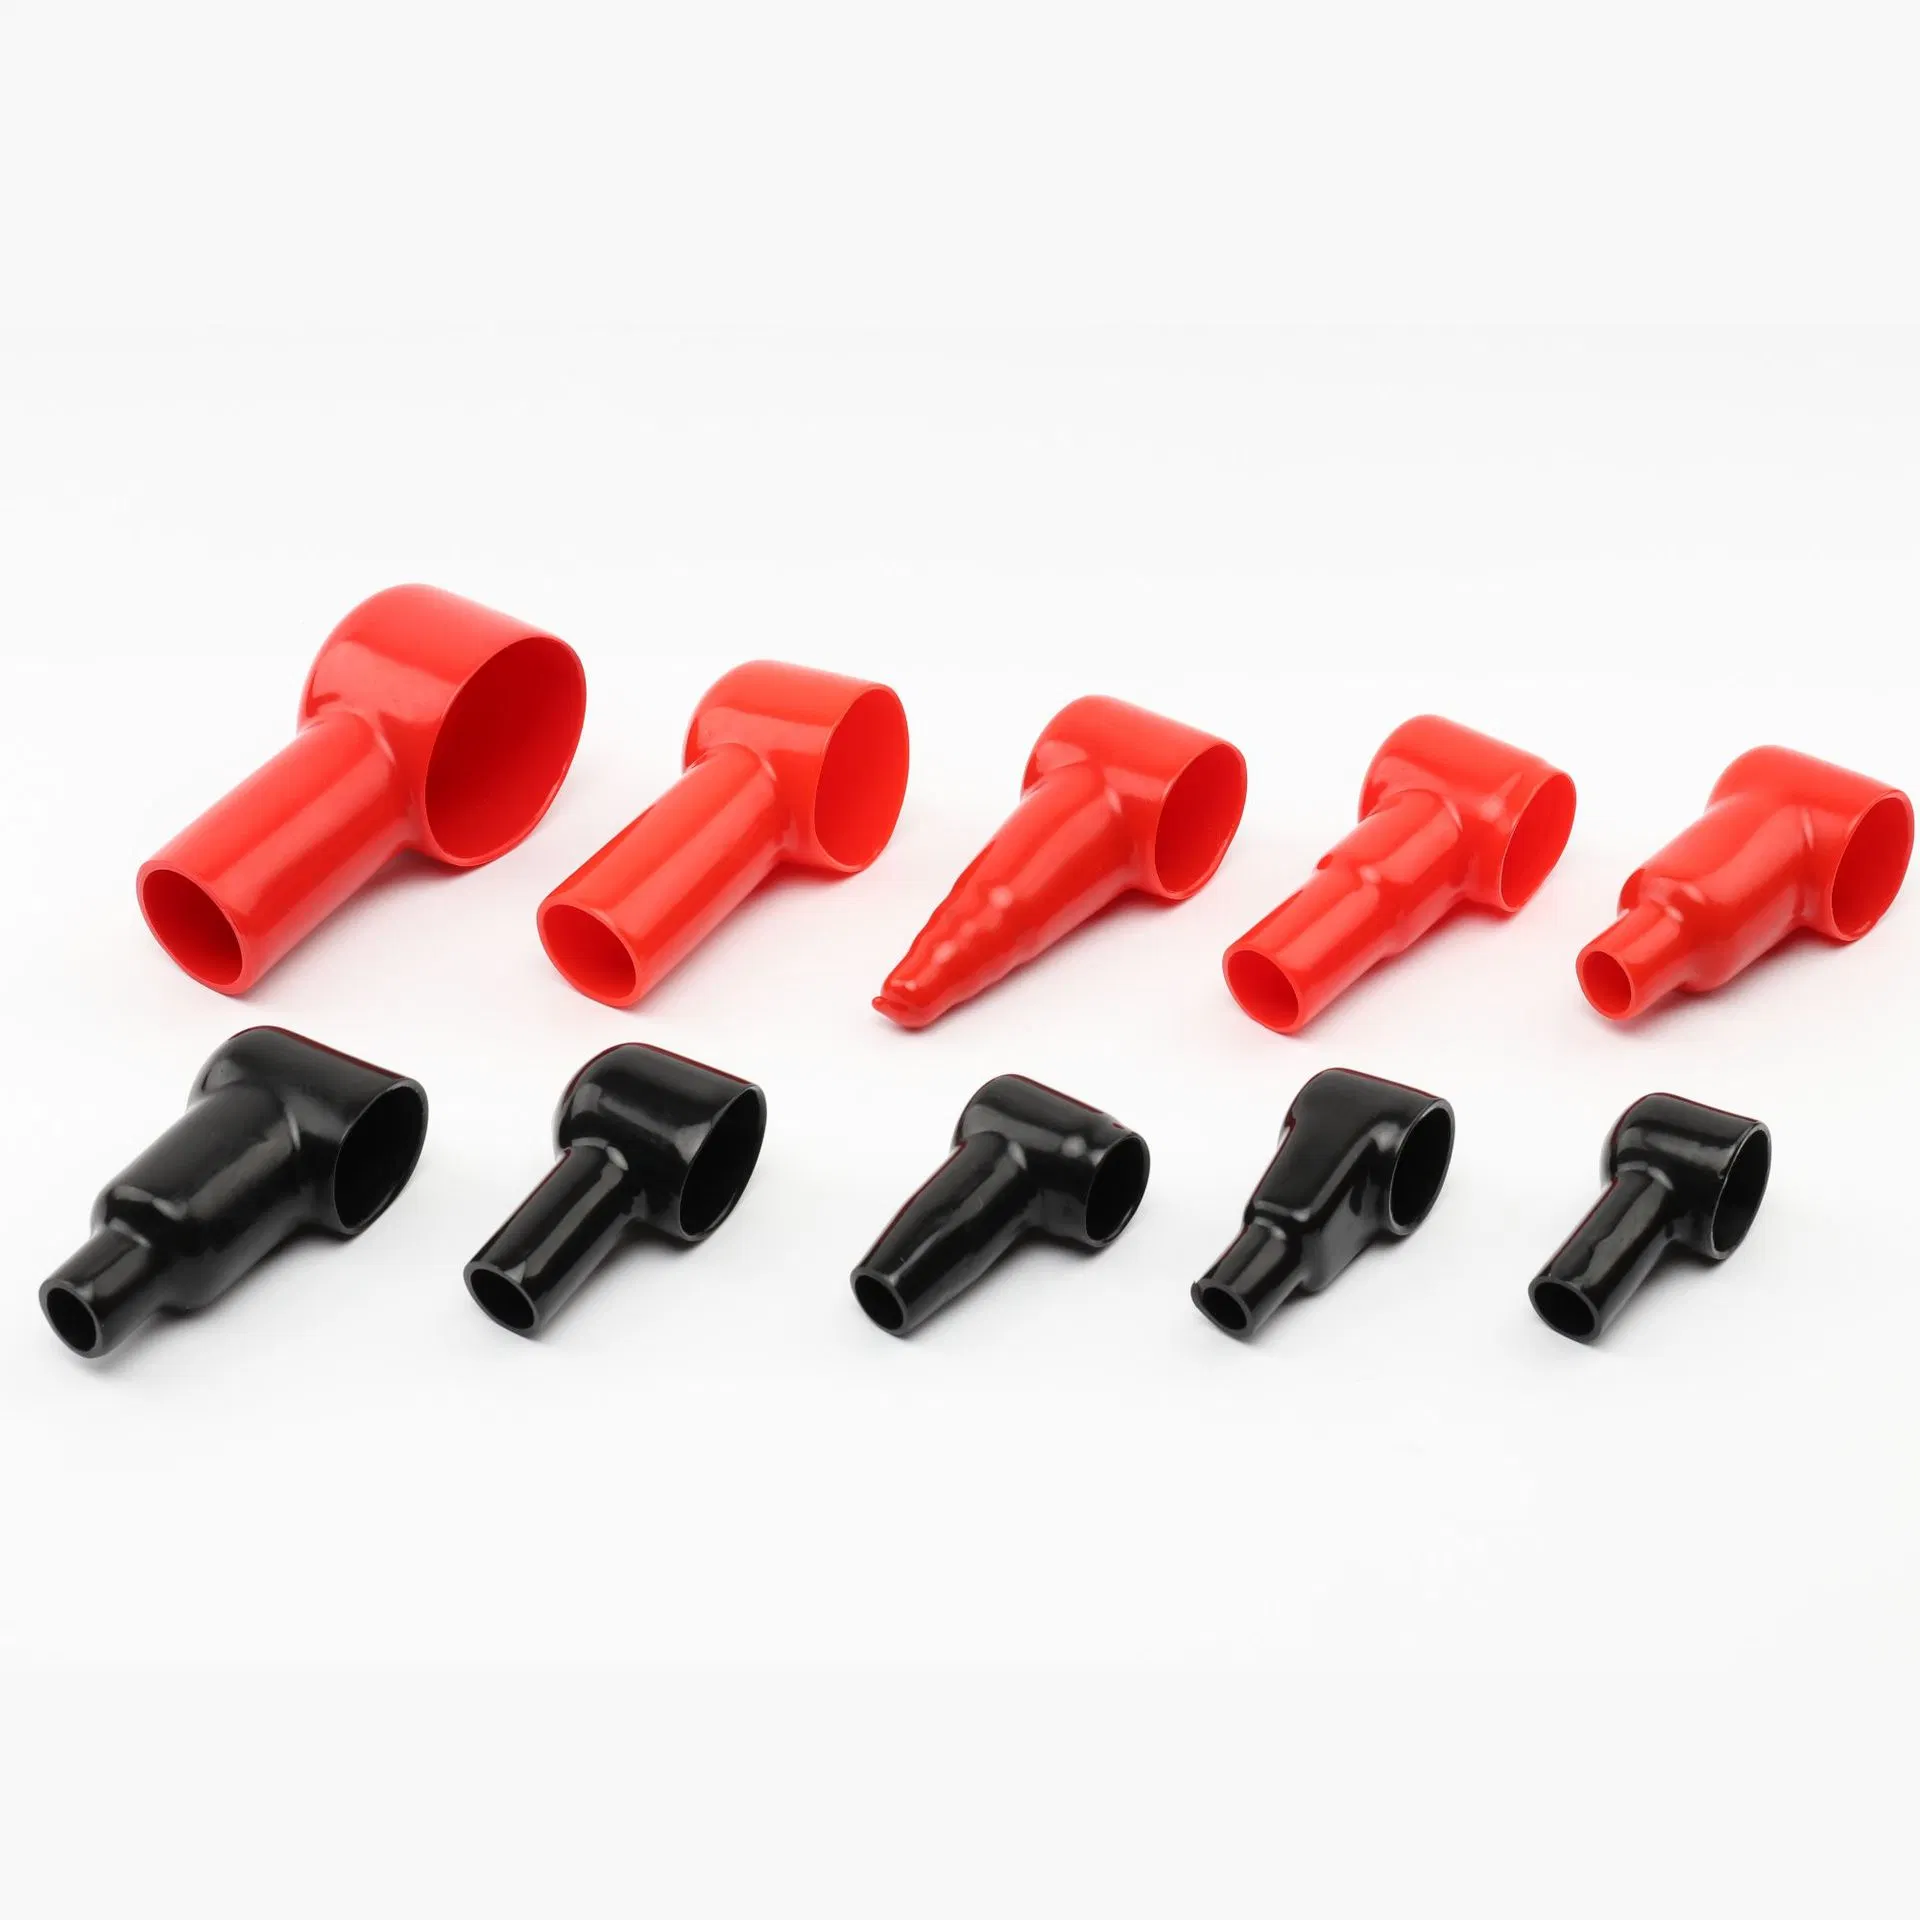 8mm2 -25mm2 Rubber Cable End Caps PVC Cable Lug Boot Plastic Cable Terminal Cover for Motorcycle Battery Wire L10-14-45